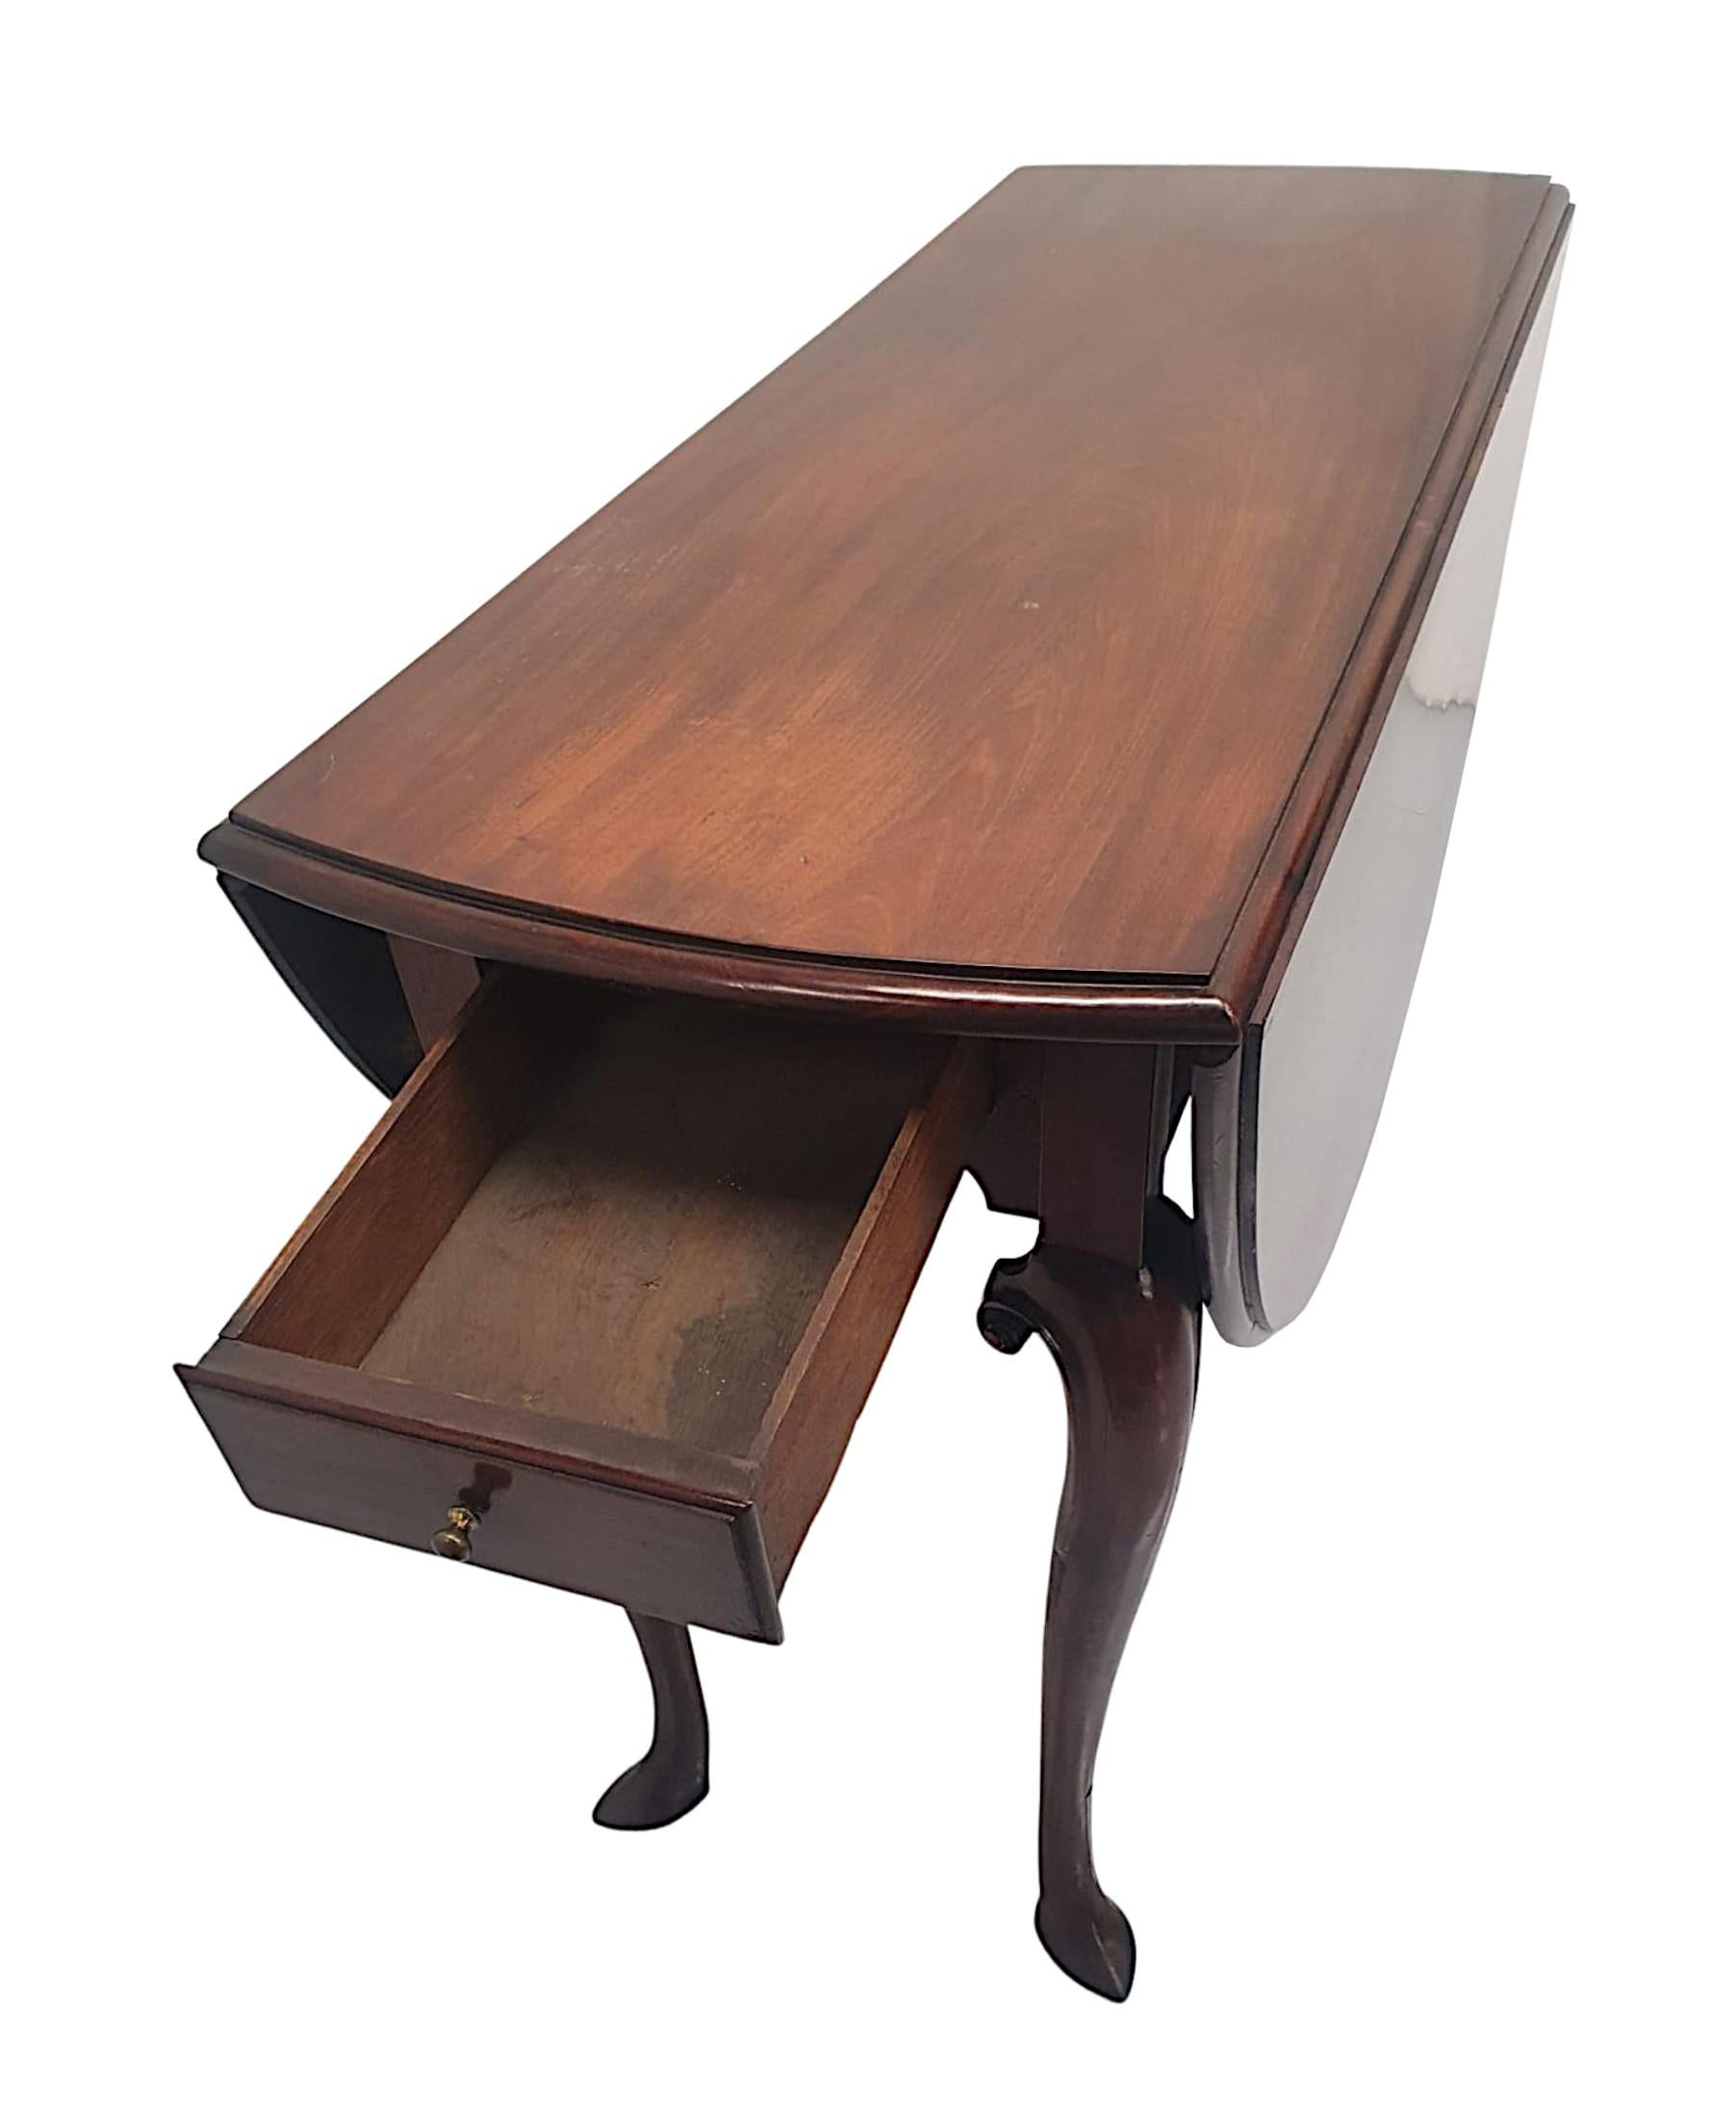 A very rare Irish Georgian solid mahogany drop leaf gate leg table of exceptional quality, finely hand carved with gorgeously rich patination and grain.  The well figured moulded and shaped top of rectangular form with curved ends, flanked with twin